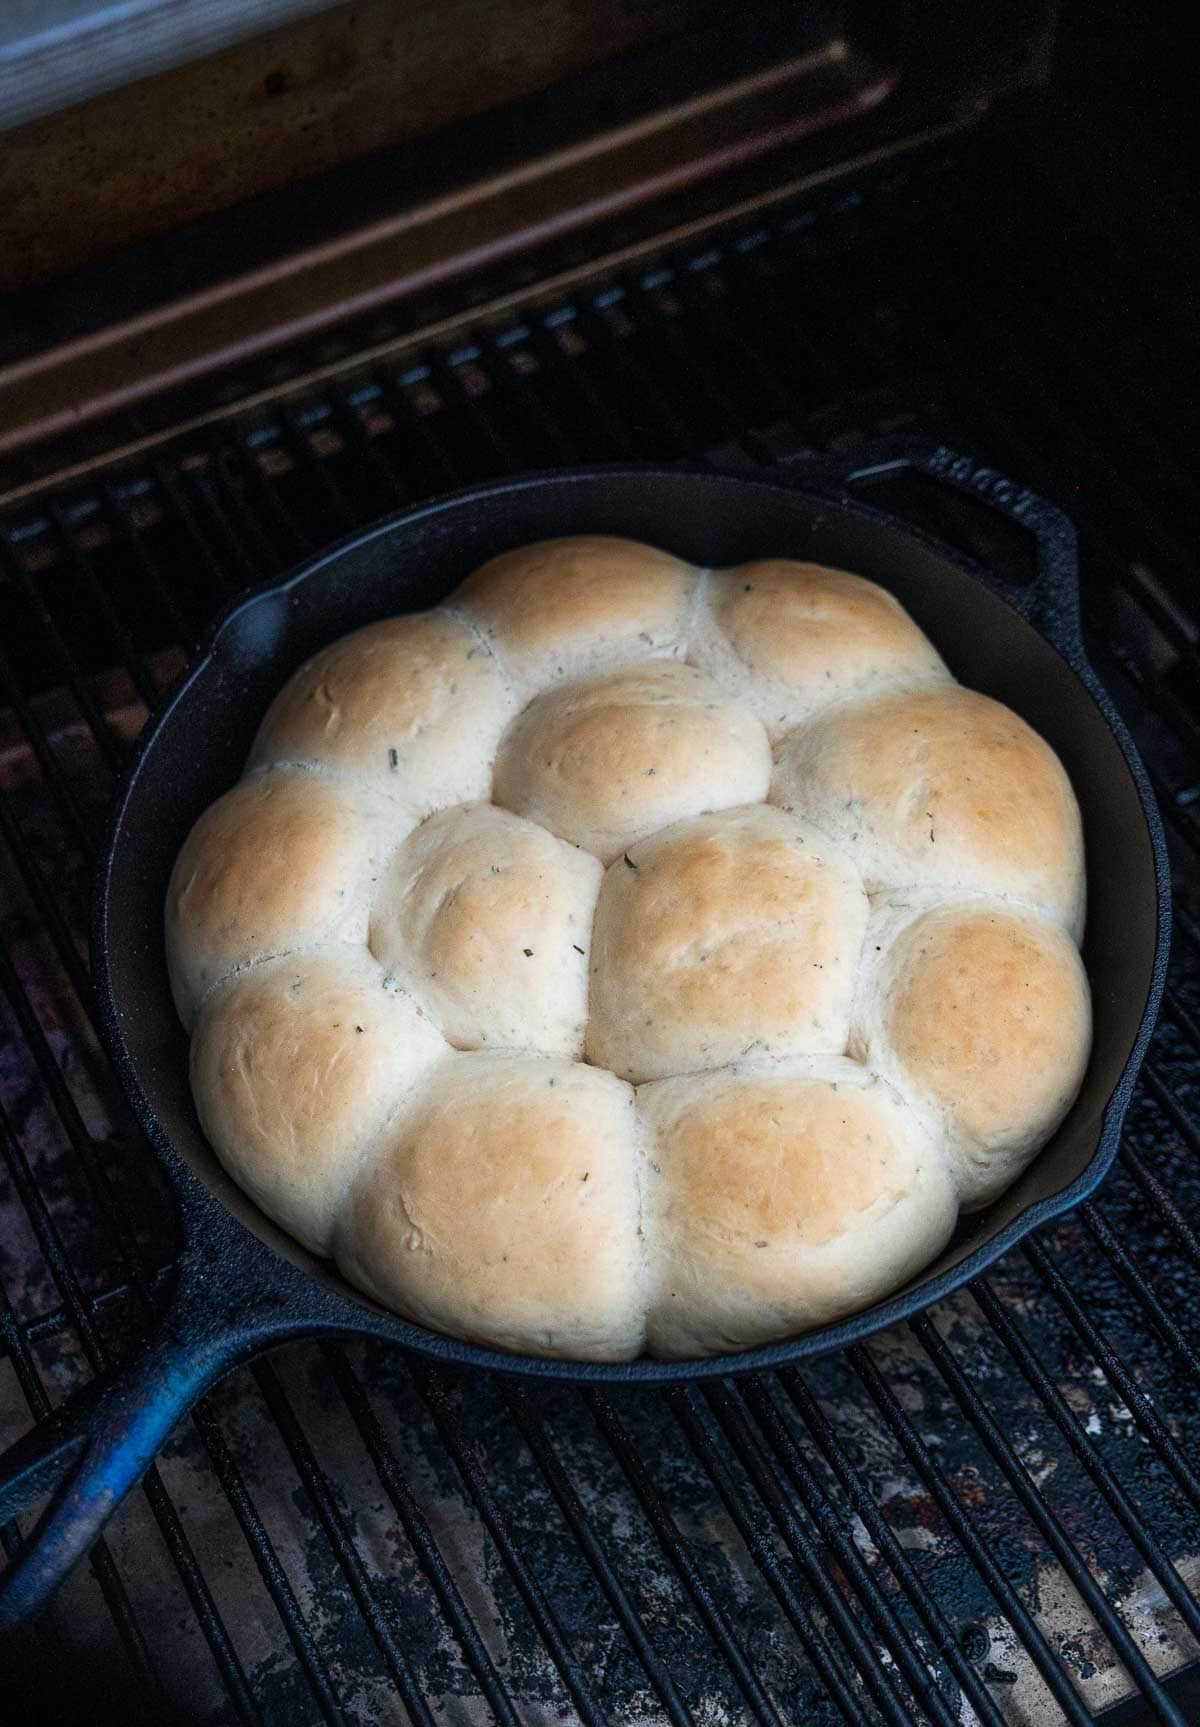 Cast Iron dinner rolls grilling over indirect heat in a pellet grill.